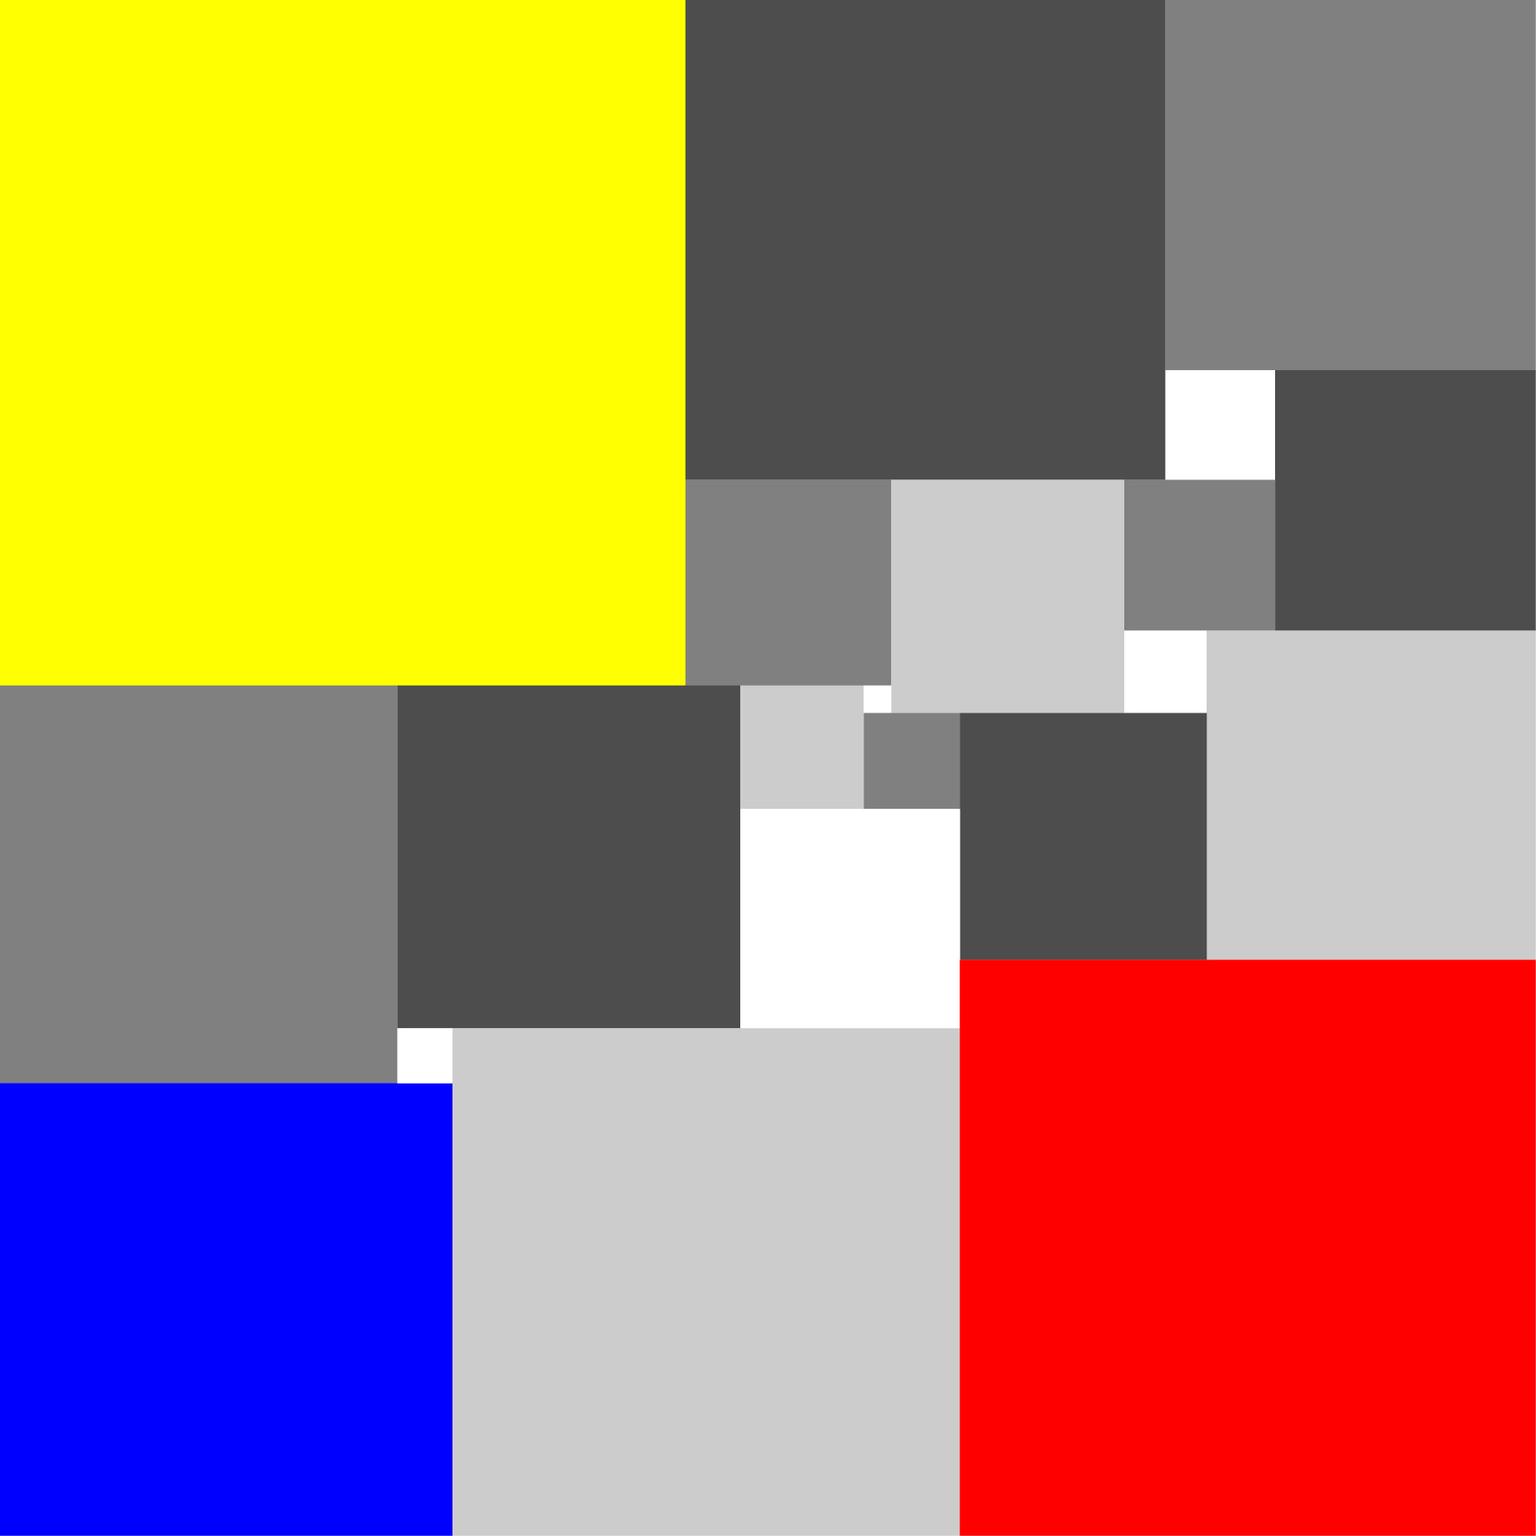 Image for entry 'SPSS order 21 – Yellow-Red-Blue Mondrian Style'